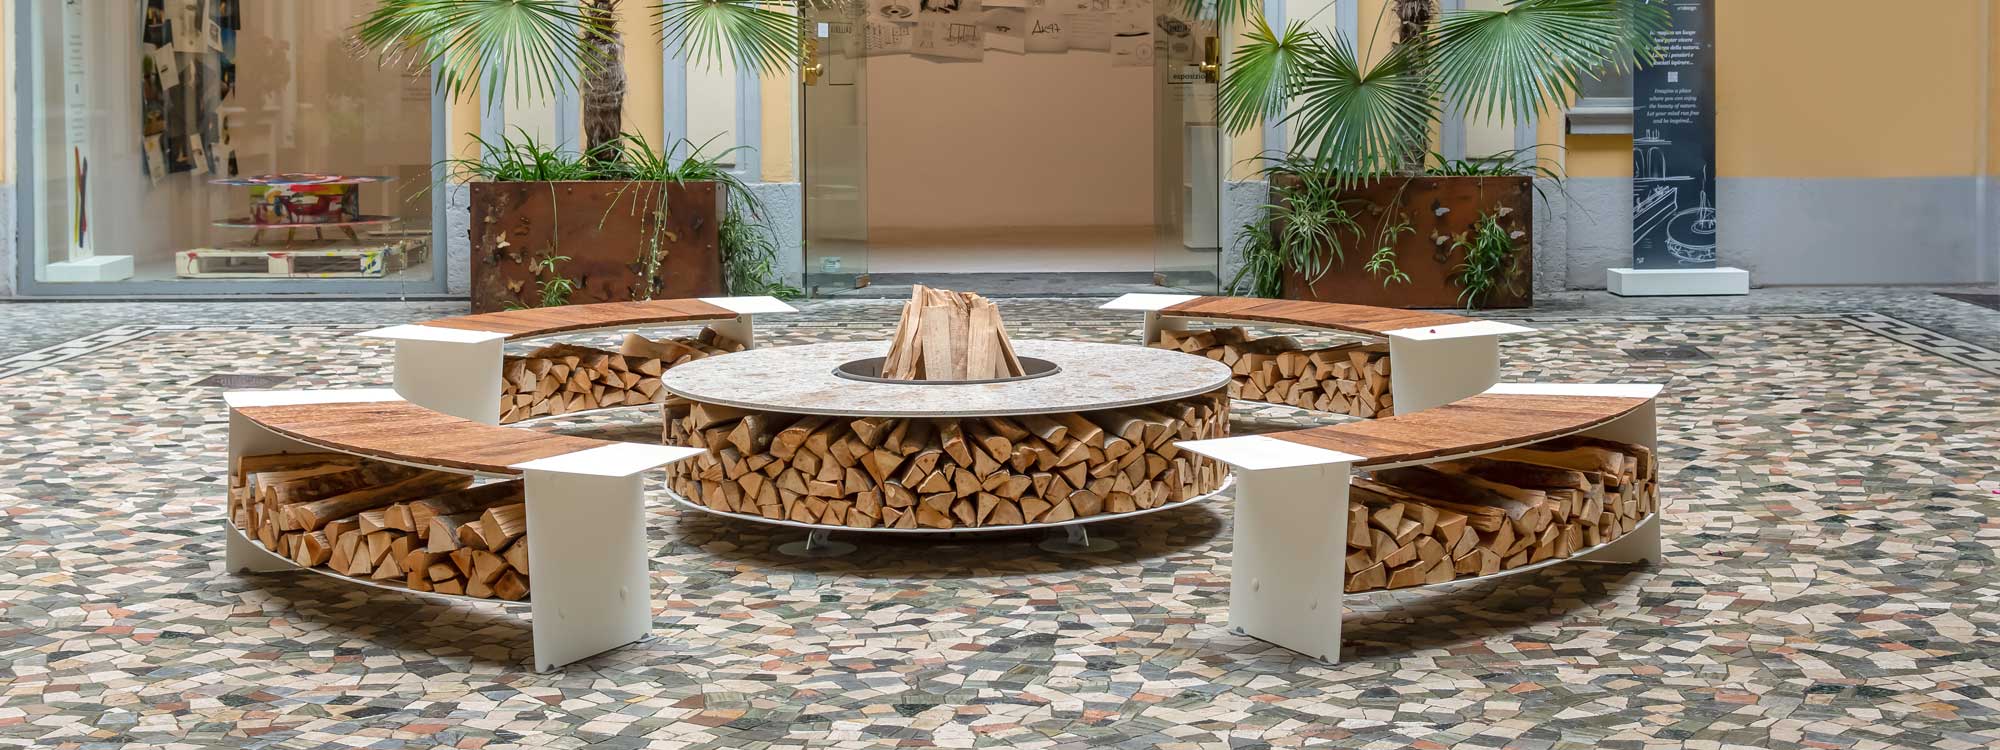 Image of AK47 Zero circular fire pit with Arlecchino ceramic upper surface, surrounded by Tobia modern bench seats in Italian courtyard